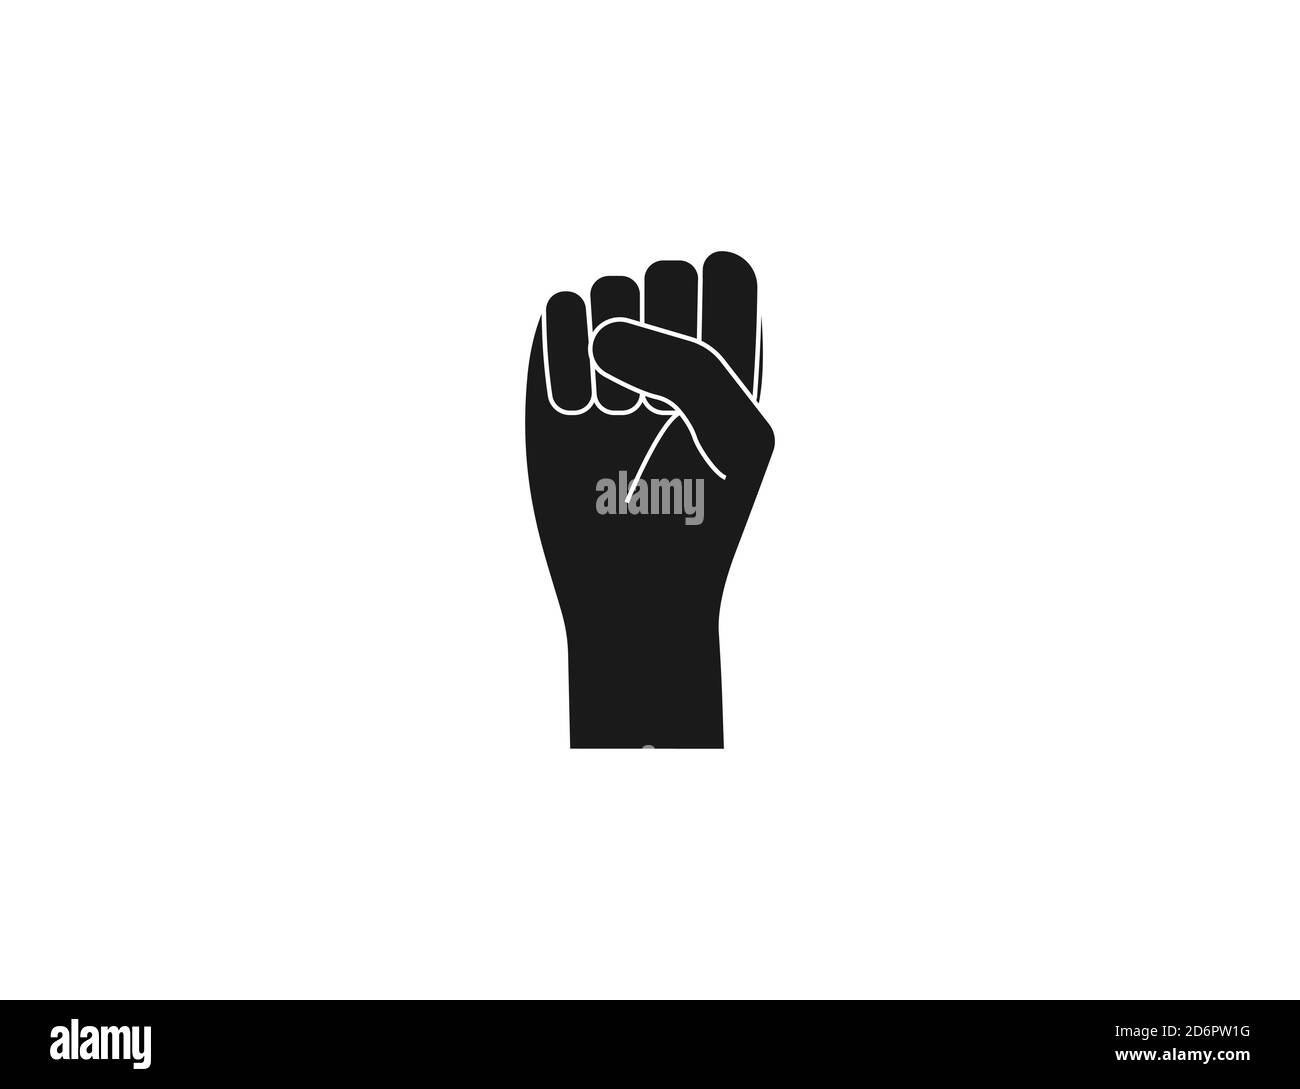 Bump, fist icon on white background. Vector illustration. Stock Vector